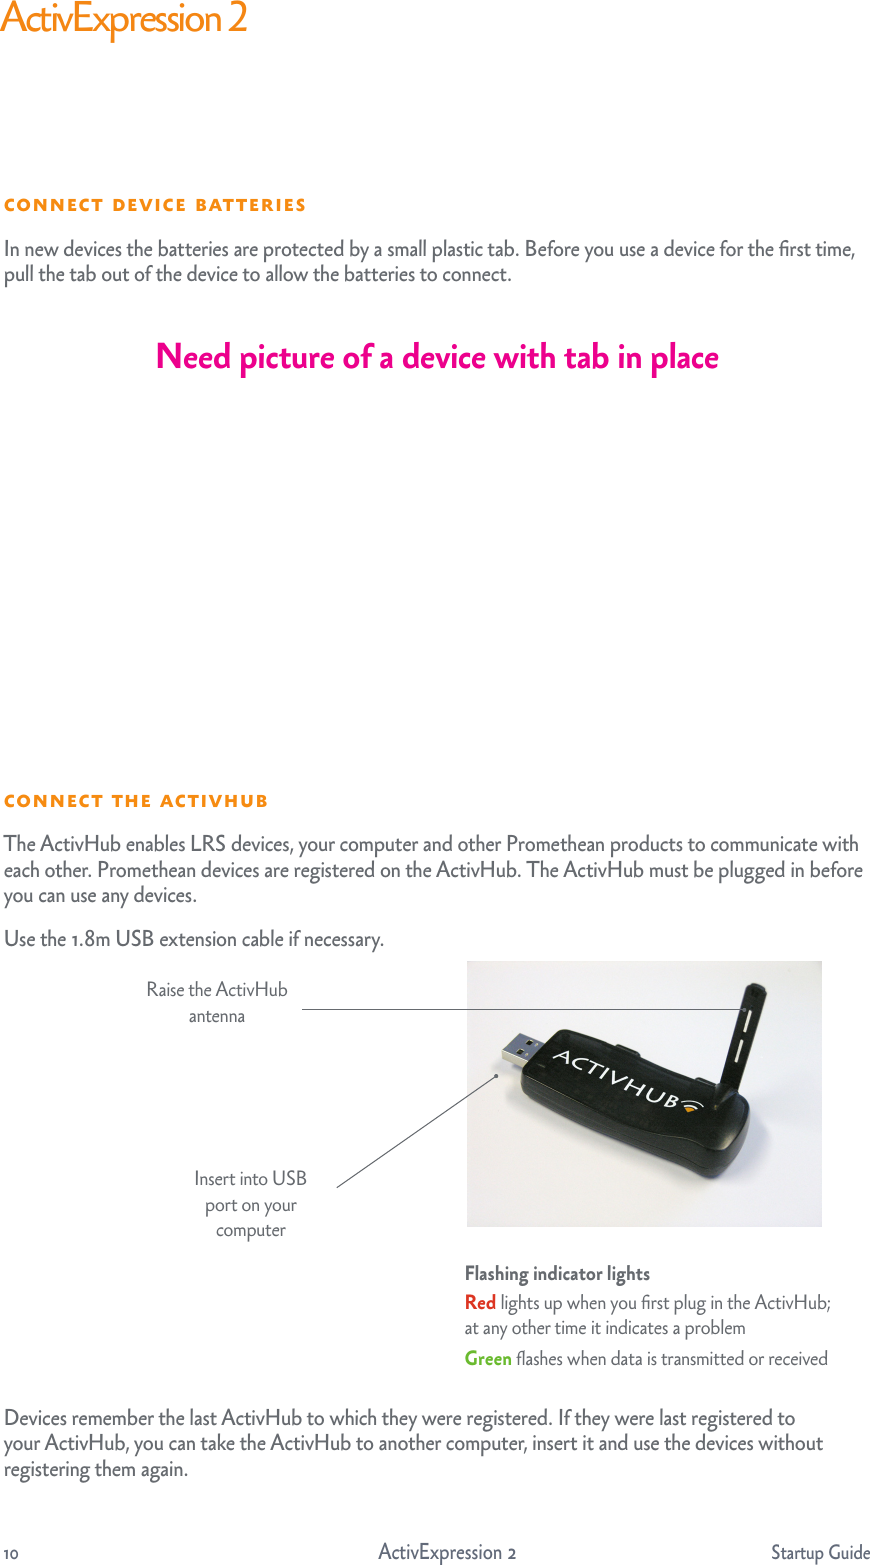 10                                    ActivExpression 2     Startup GuideActivExpression 2  The ActivHub enables LRS devices, your computer and other Promethean products to communicate with each other. Promethean devices are registered on the ActivHub. The ActivHub must be plugged in before you can use any devices.Use the 1.8m USB extension cable if necessary.Devices remember the last ActivHub to which they were registered. If they were last registered to your ActivHub, you can take the ActivHub to another computer, insert it and use the devices without registering them again. Raise the ActivHub antennaInsert into USB port on your computerFlashing indicator lights Red lights up when you ﬁrst plug in the ActivHub; at any other time it indicates a problemGreen ﬂashes when data is transmitted or received  In new devices the batteries are protected by a small plastic tab. Before you use a device for the ﬁrst time, pull the tab out of the device to allow the batteries to connect.Need picture of a device with tab in place